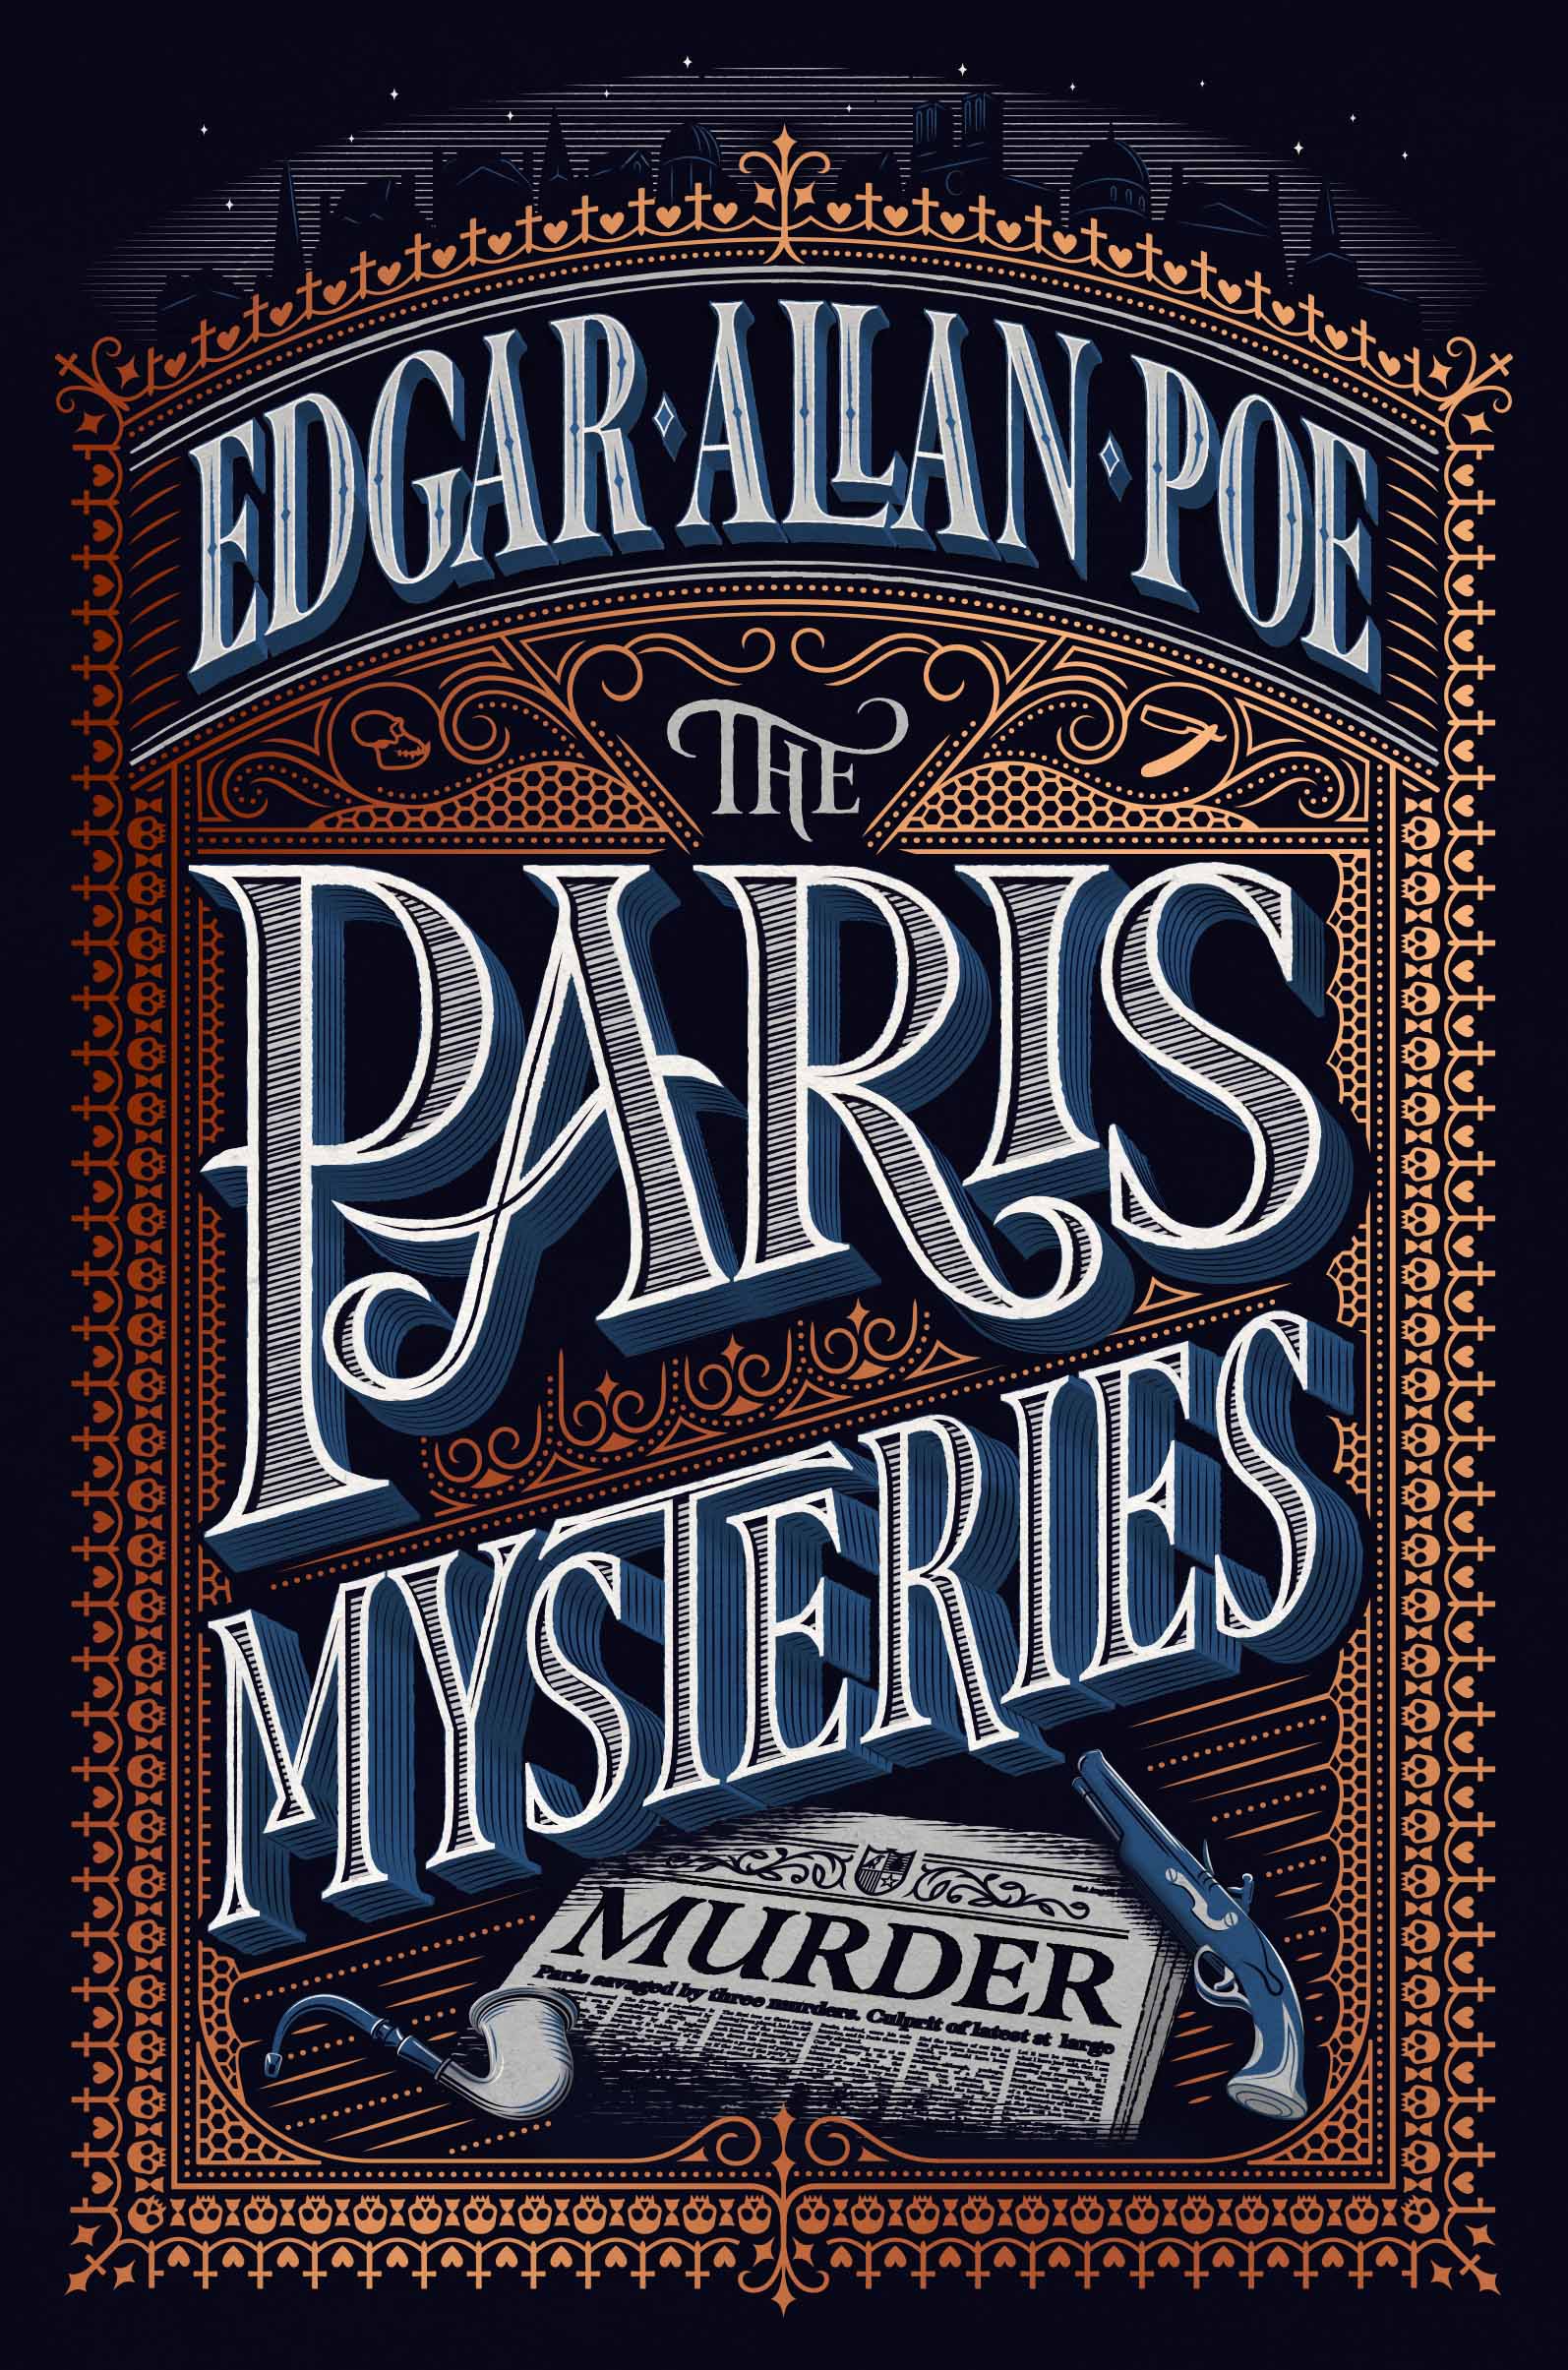 Paris Mysteries Book Cover Lettering and illustration